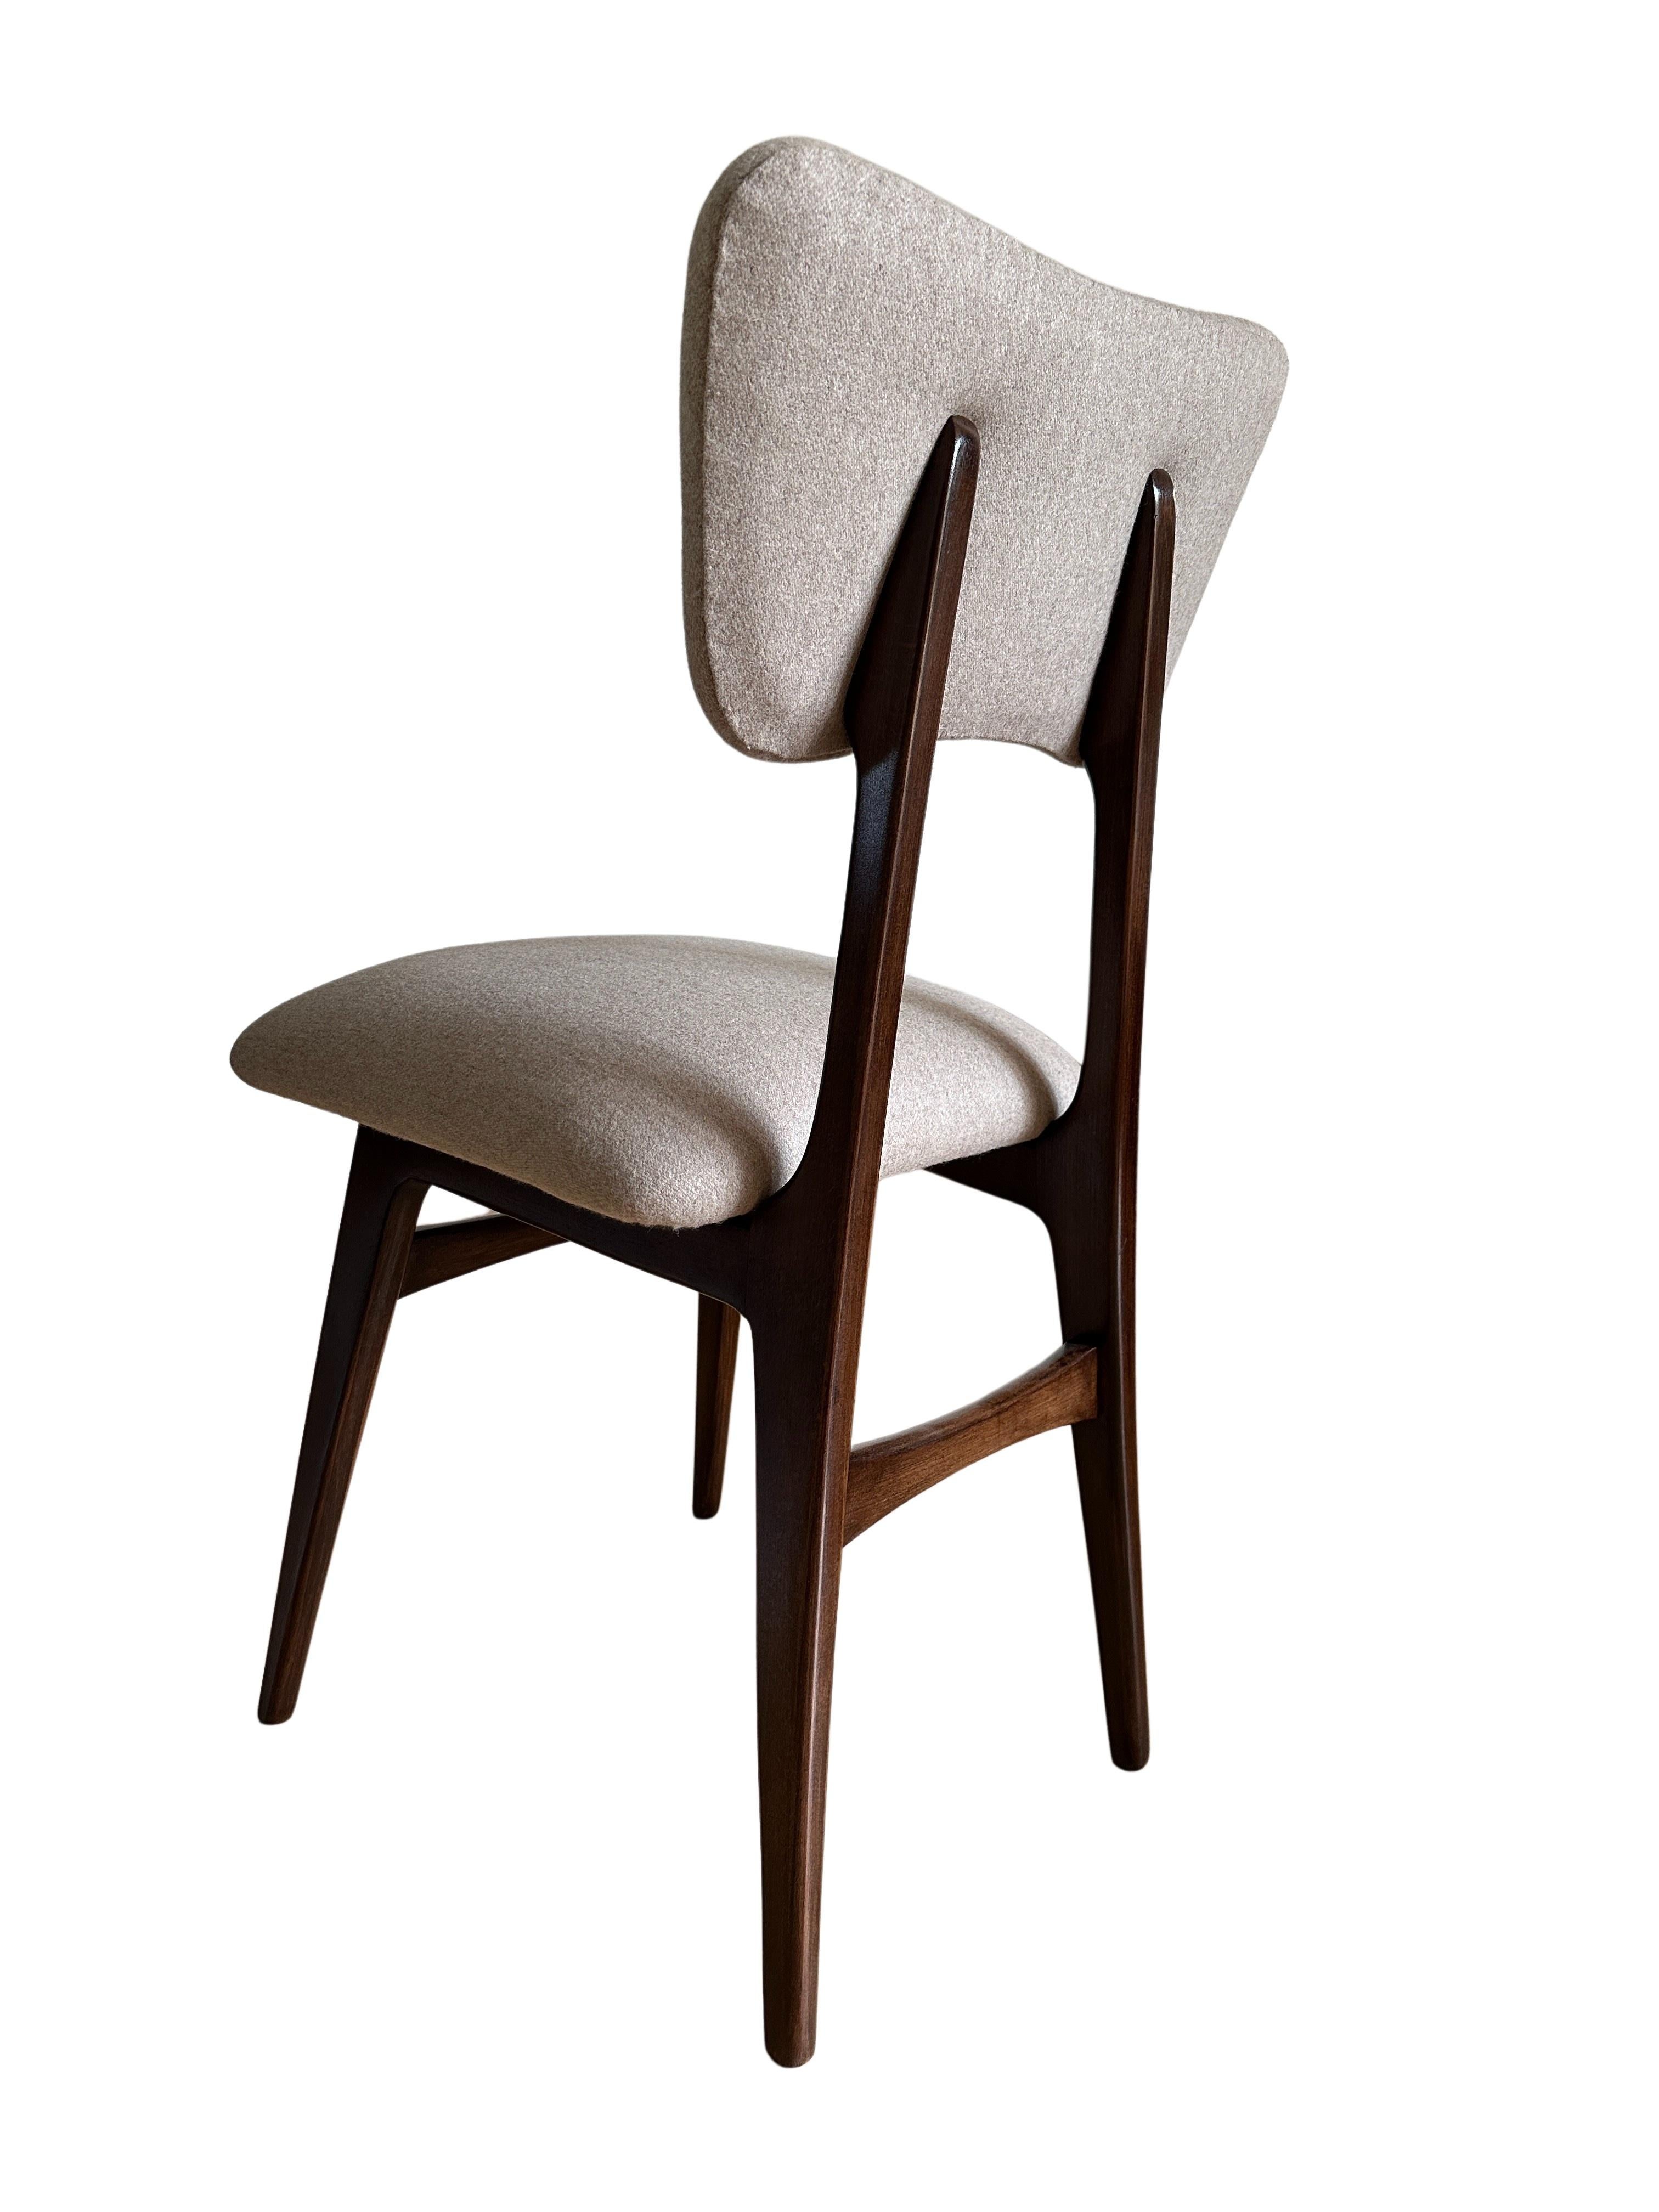 Set of Two Midcentury Dining Chairs in Beige Wool Upholstery, Poland, 1960s For Sale 5